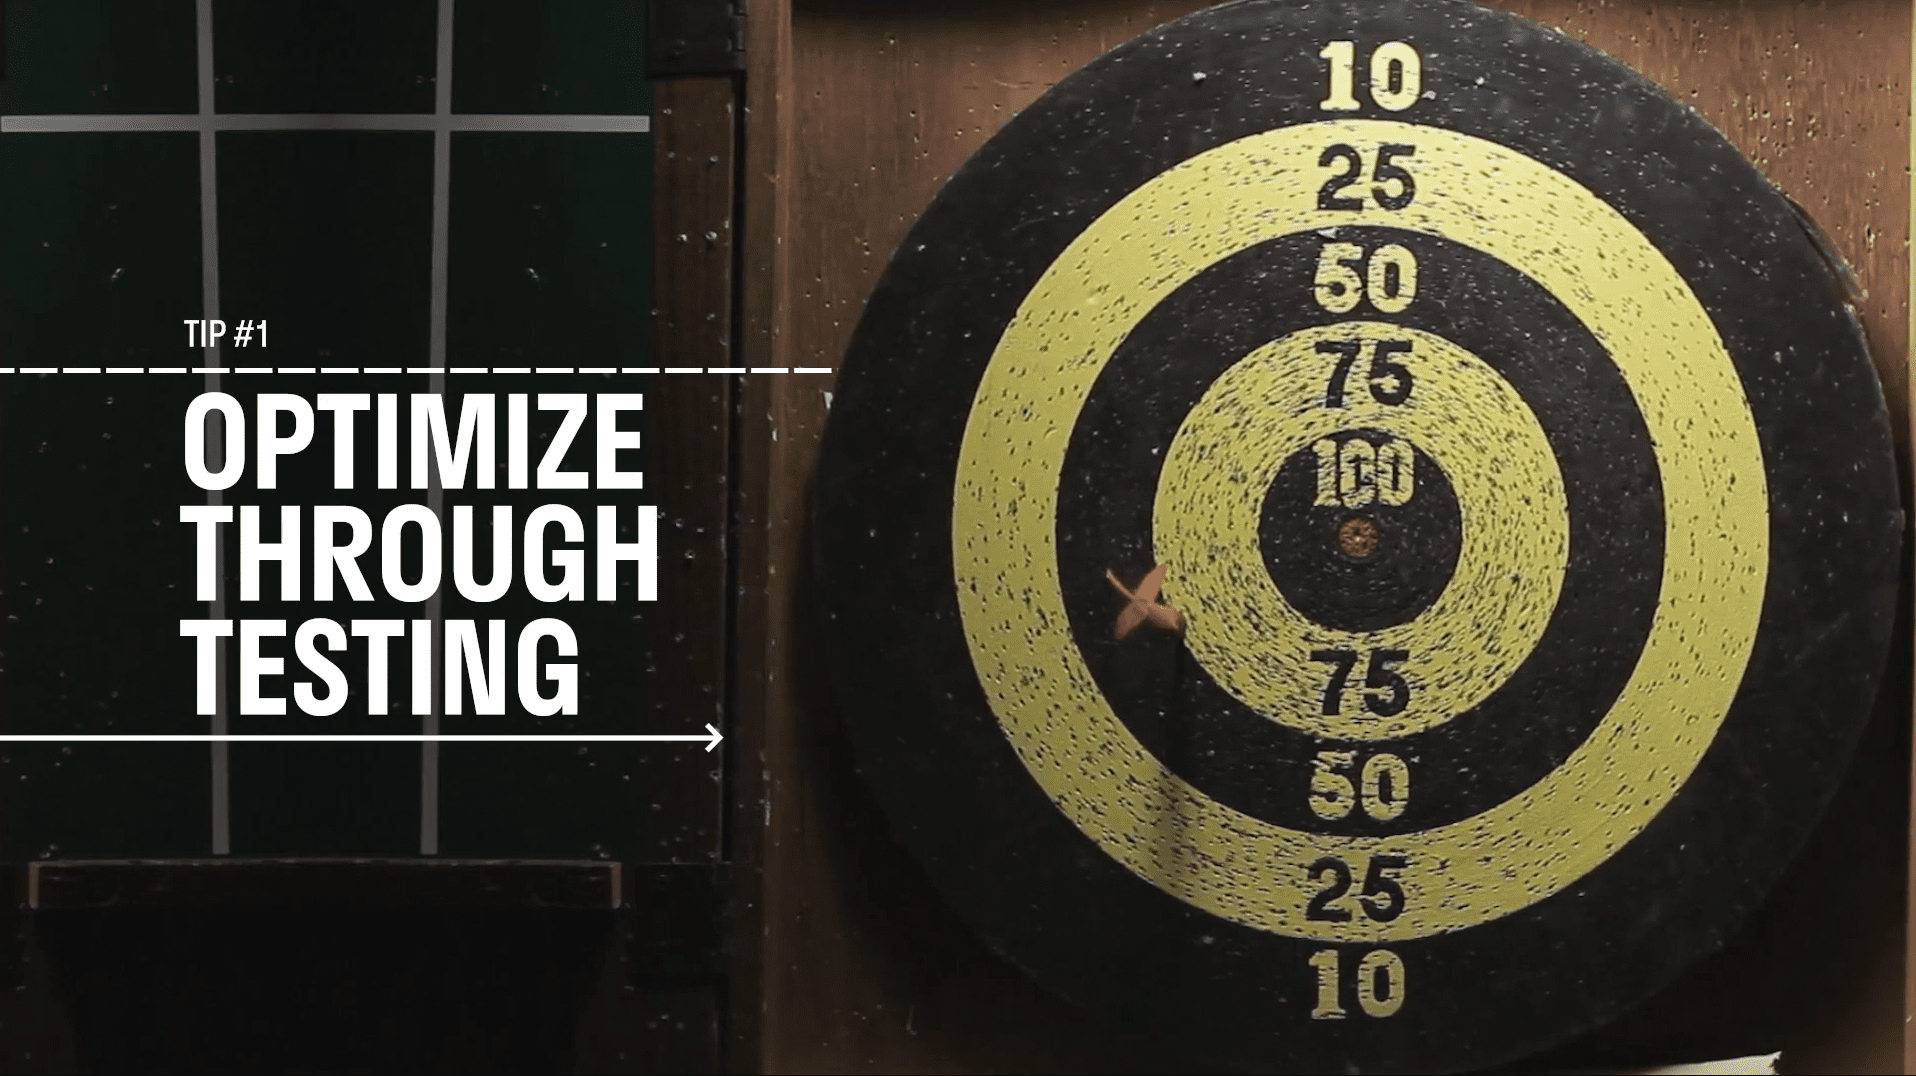 Image of a dart board with white text that says Tip 1 Optimize Through Testing. How to use audience testing to improve your videos.